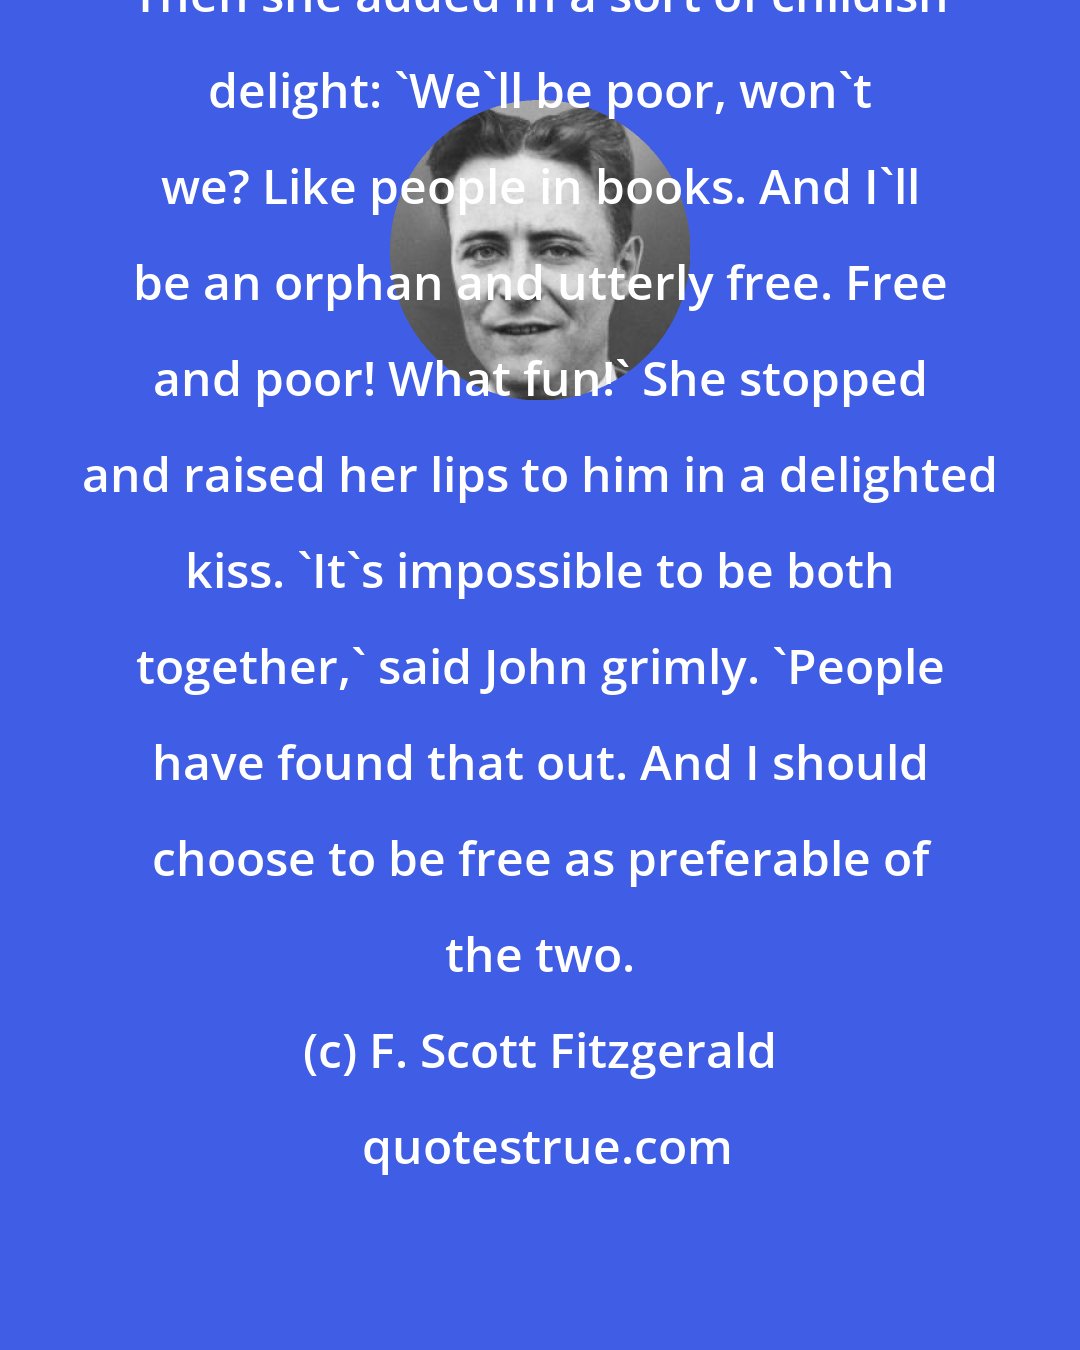 F. Scott Fitzgerald: Then she added in a sort of childish delight: 'We'll be poor, won't we? Like people in books. And I'll be an orphan and utterly free. Free and poor! What fun!' She stopped and raised her lips to him in a delighted kiss. 'It's impossible to be both together,' said John grimly. 'People have found that out. And I should choose to be free as preferable of the two.